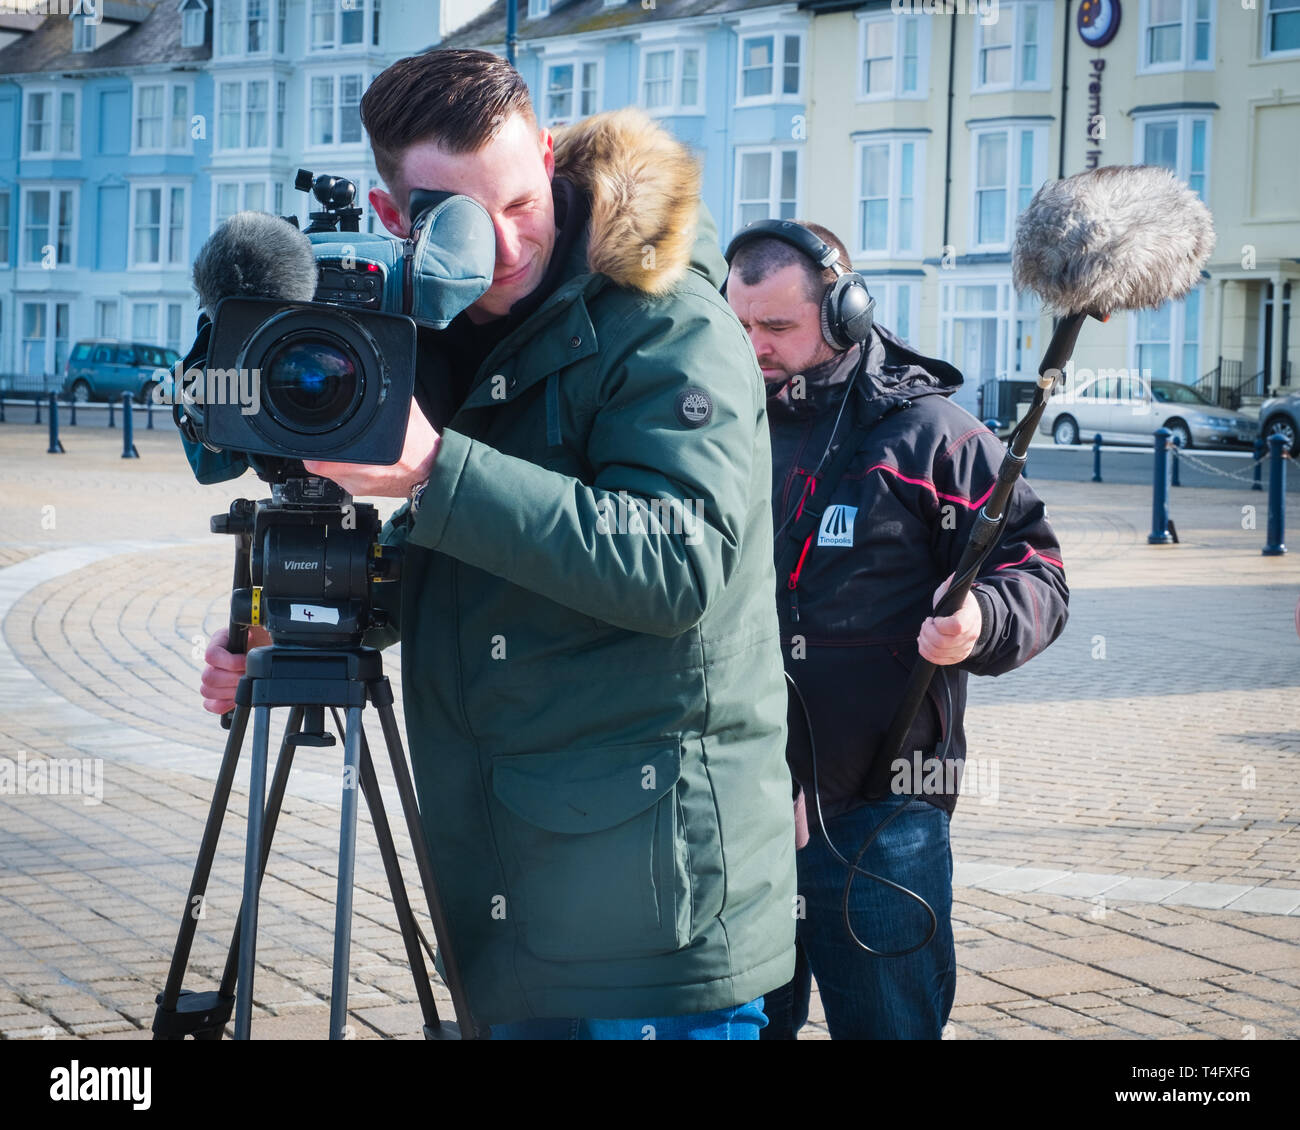 Media workers in the UK: A professional television crew  on location recording an item for broadcast, with the video camerman pointing his lens directly at the subject. UK Stock Photo